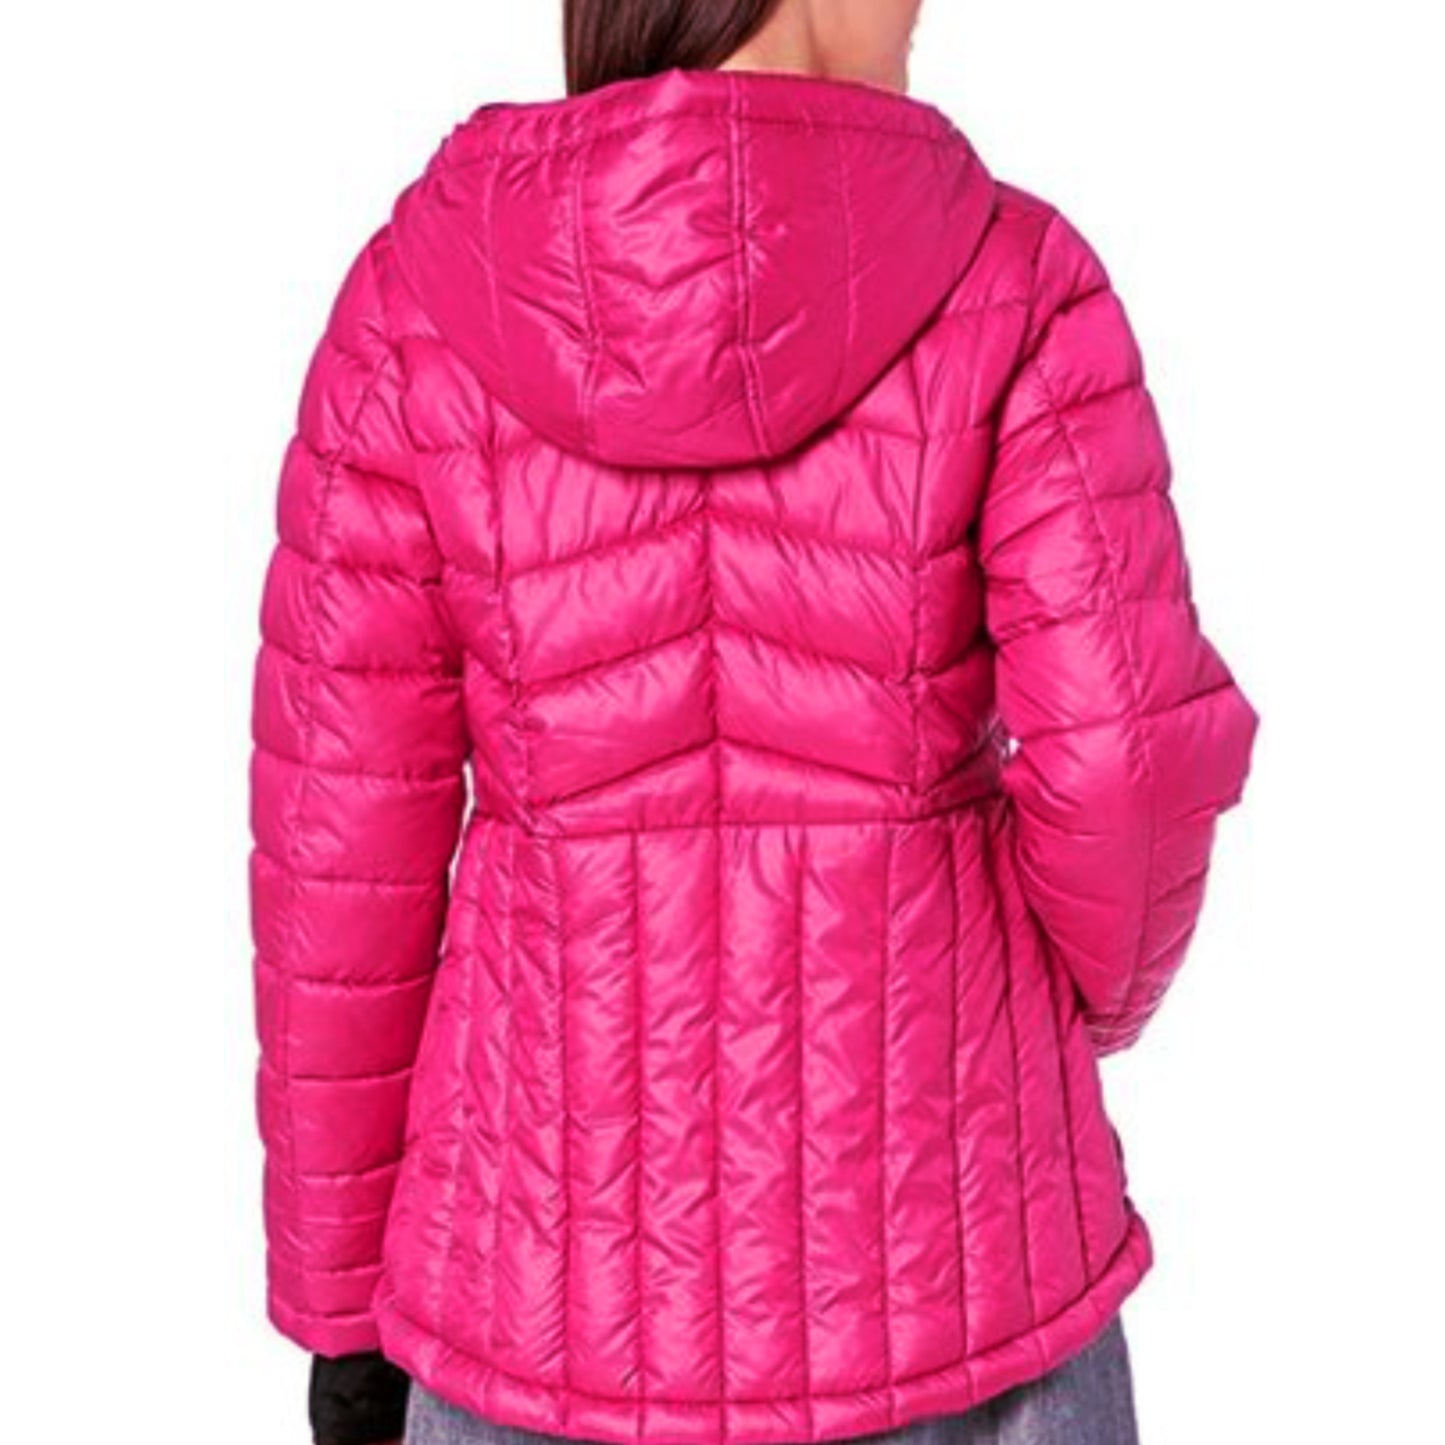 Jessica Simpson Women's Packable Quilted Insulated Hooded Puffer Winter Coat Jacket